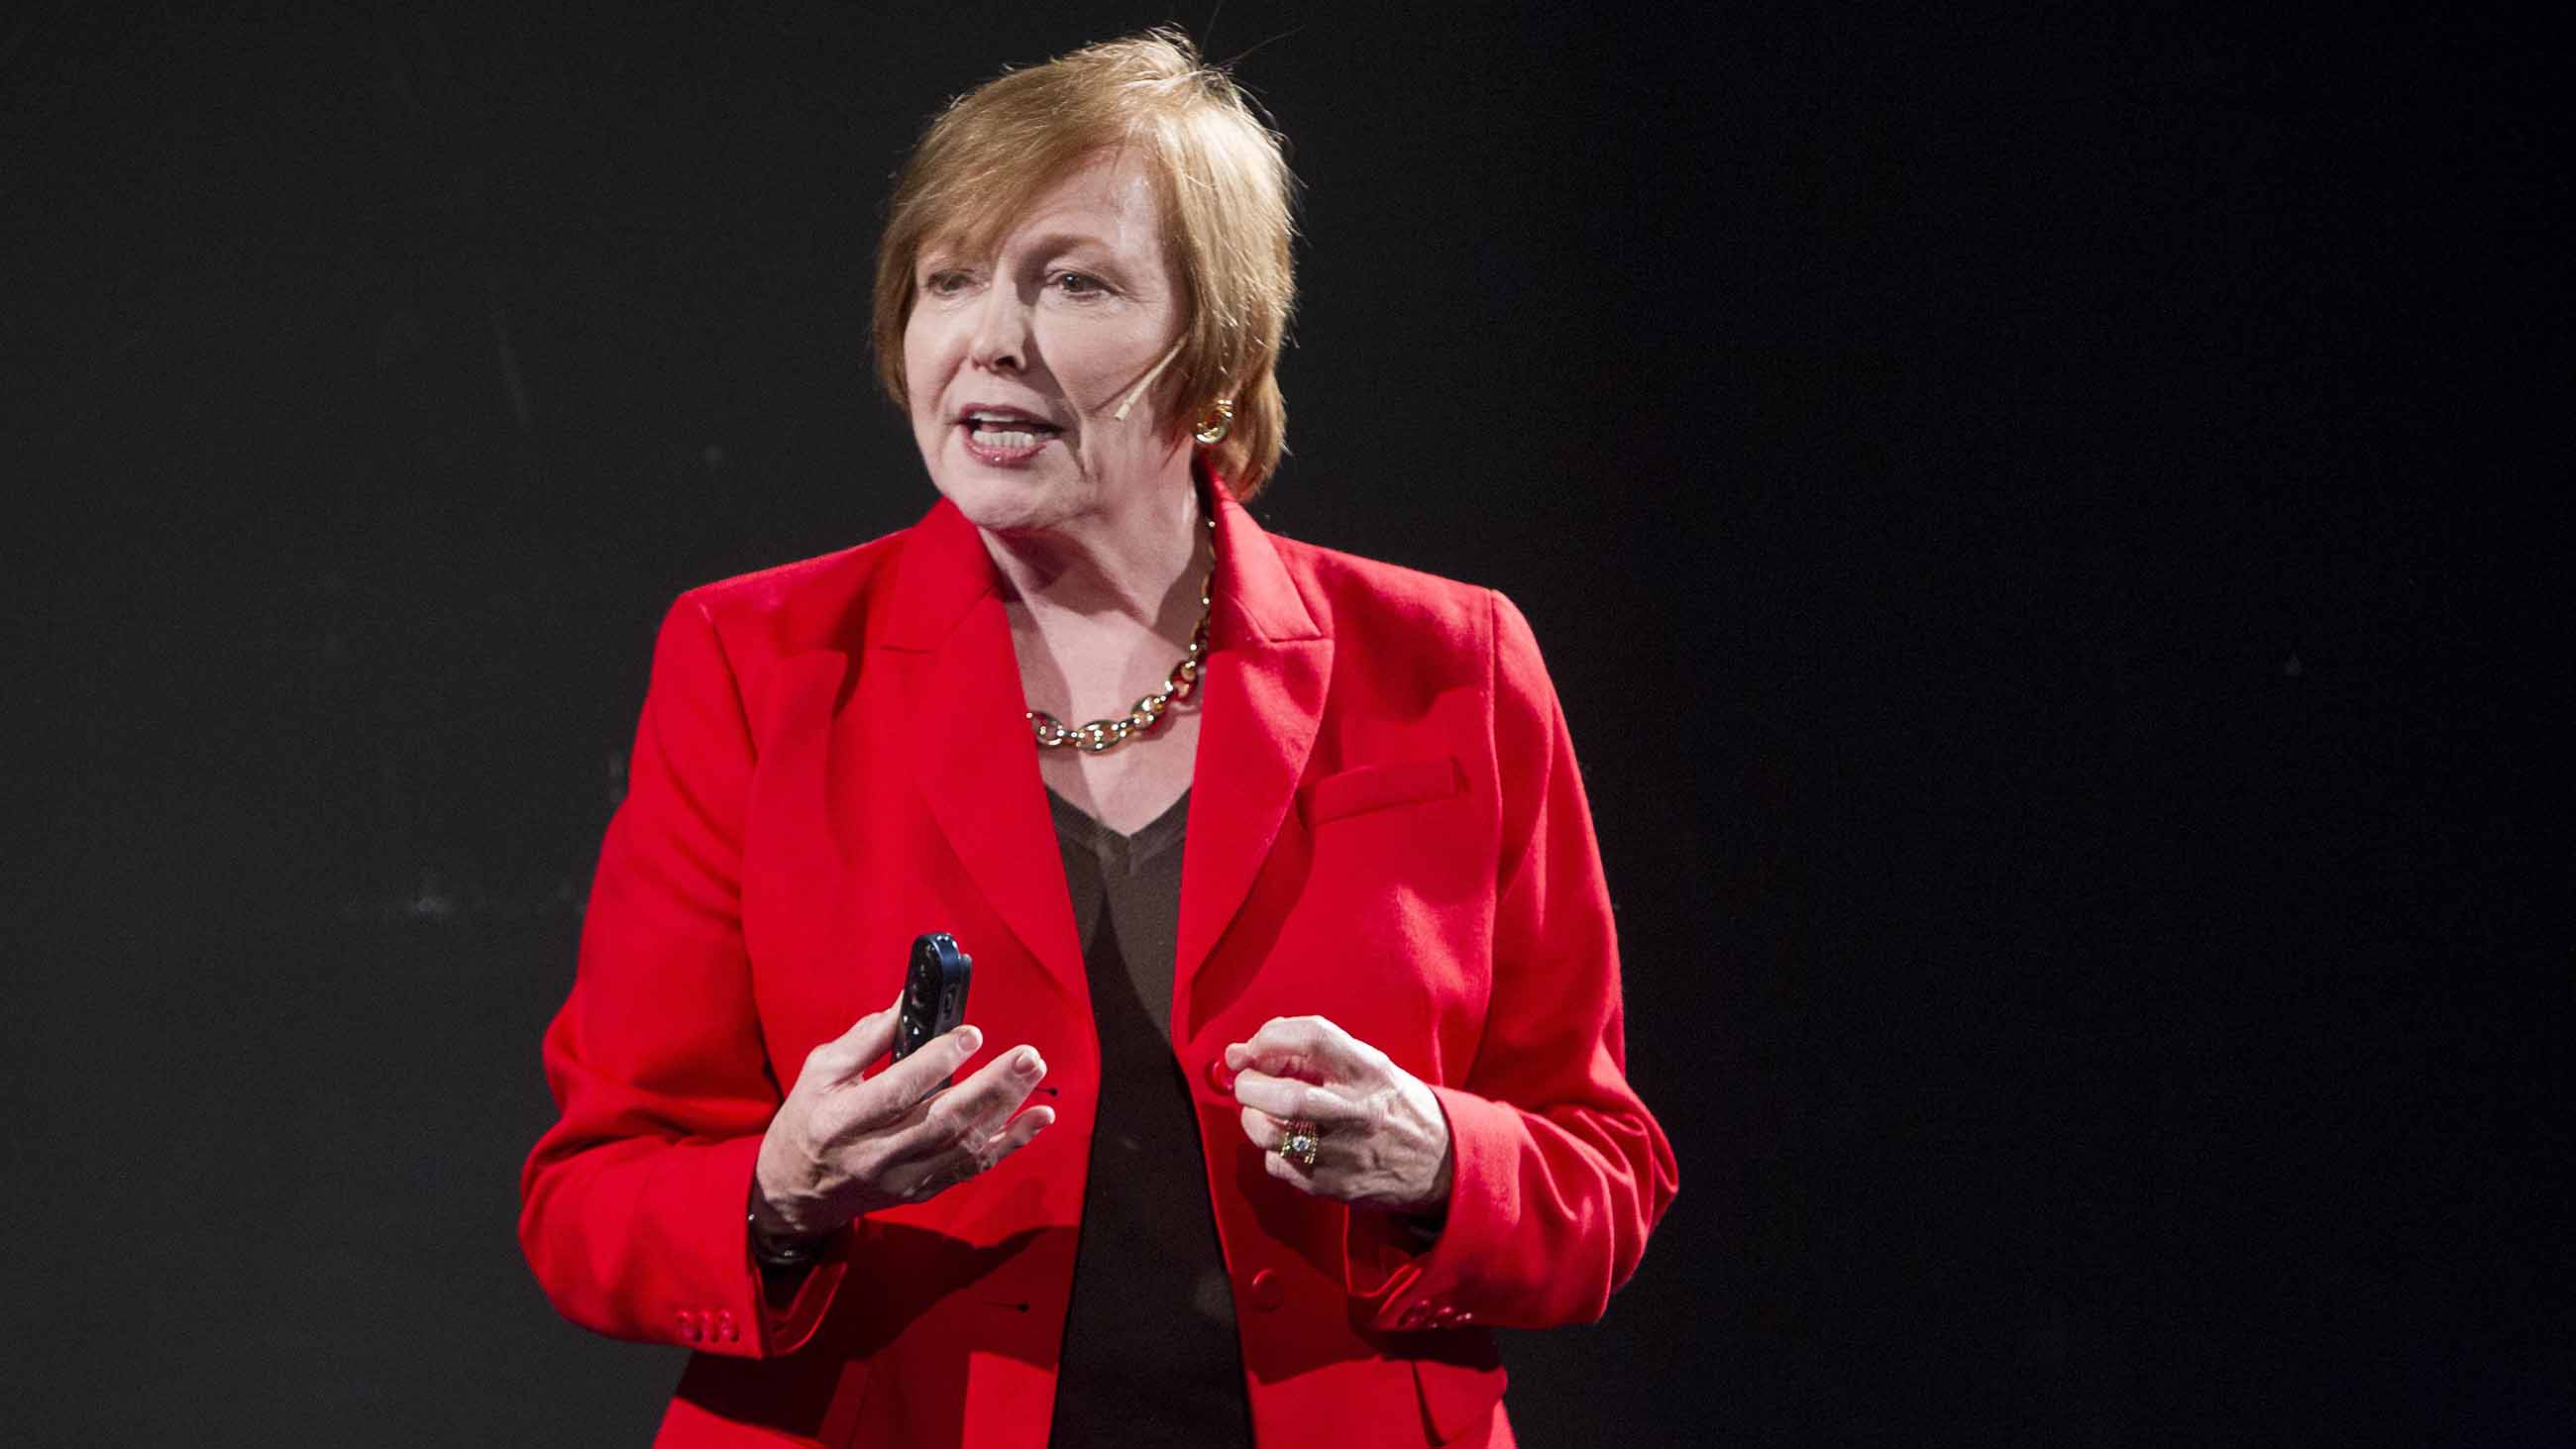 CDC director Brenda Fitzgerald resigned on Wednesday amid concerns over financial conflicts of interest.